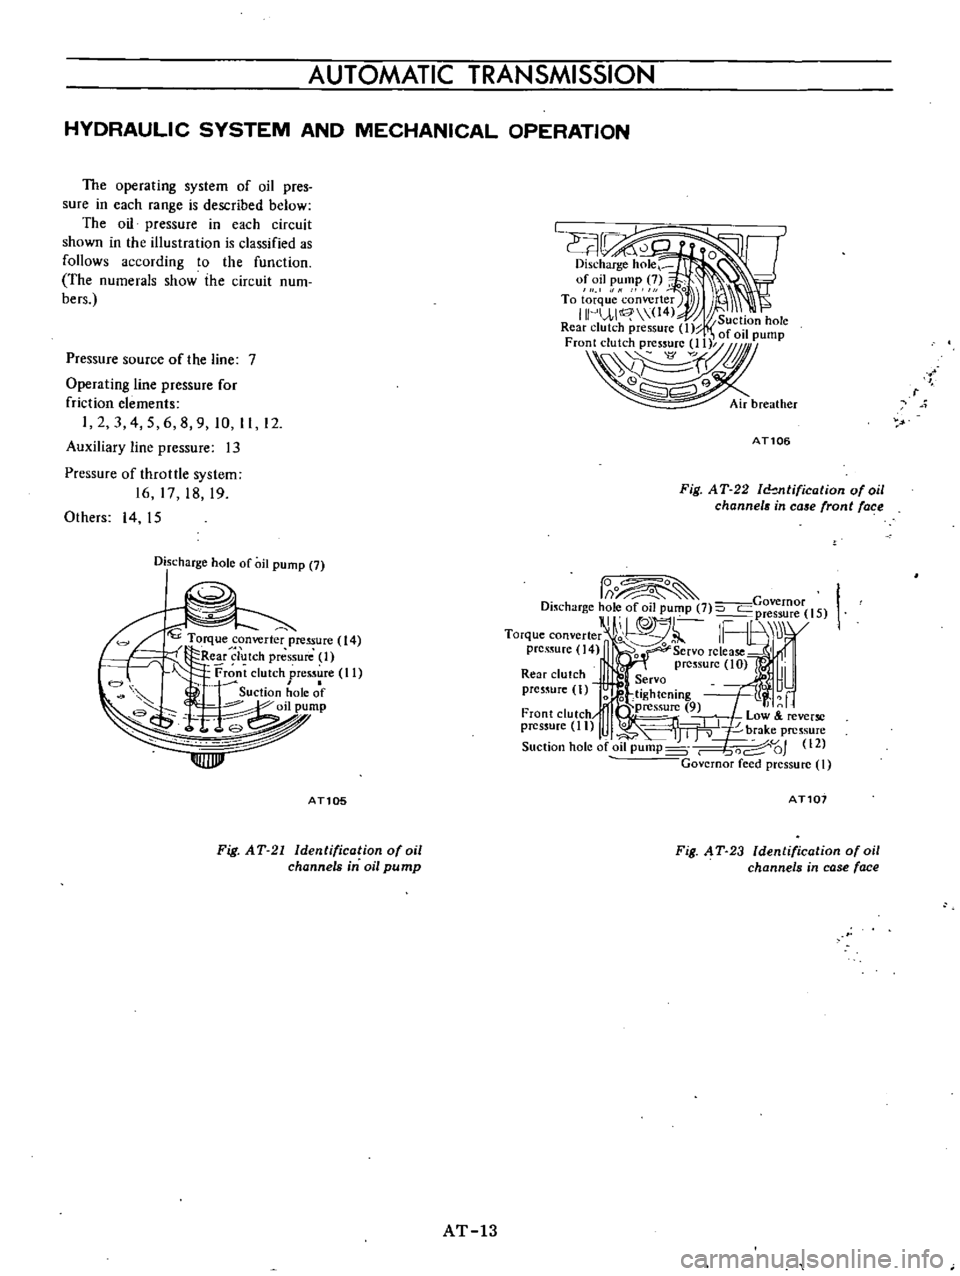 DATSUN B110 1973  Service Repair Manual 
AUTOMATIC 
TRANSMISSION

HYDRAULIC 
SYSTEM 
AND

MECHANICAL 
OPERATION

The

operating 
system 
of 
oil

pres

sure 
in 
each

range 
is

described 
below

The 
oil

pressure 
in 
each 
circuit

show